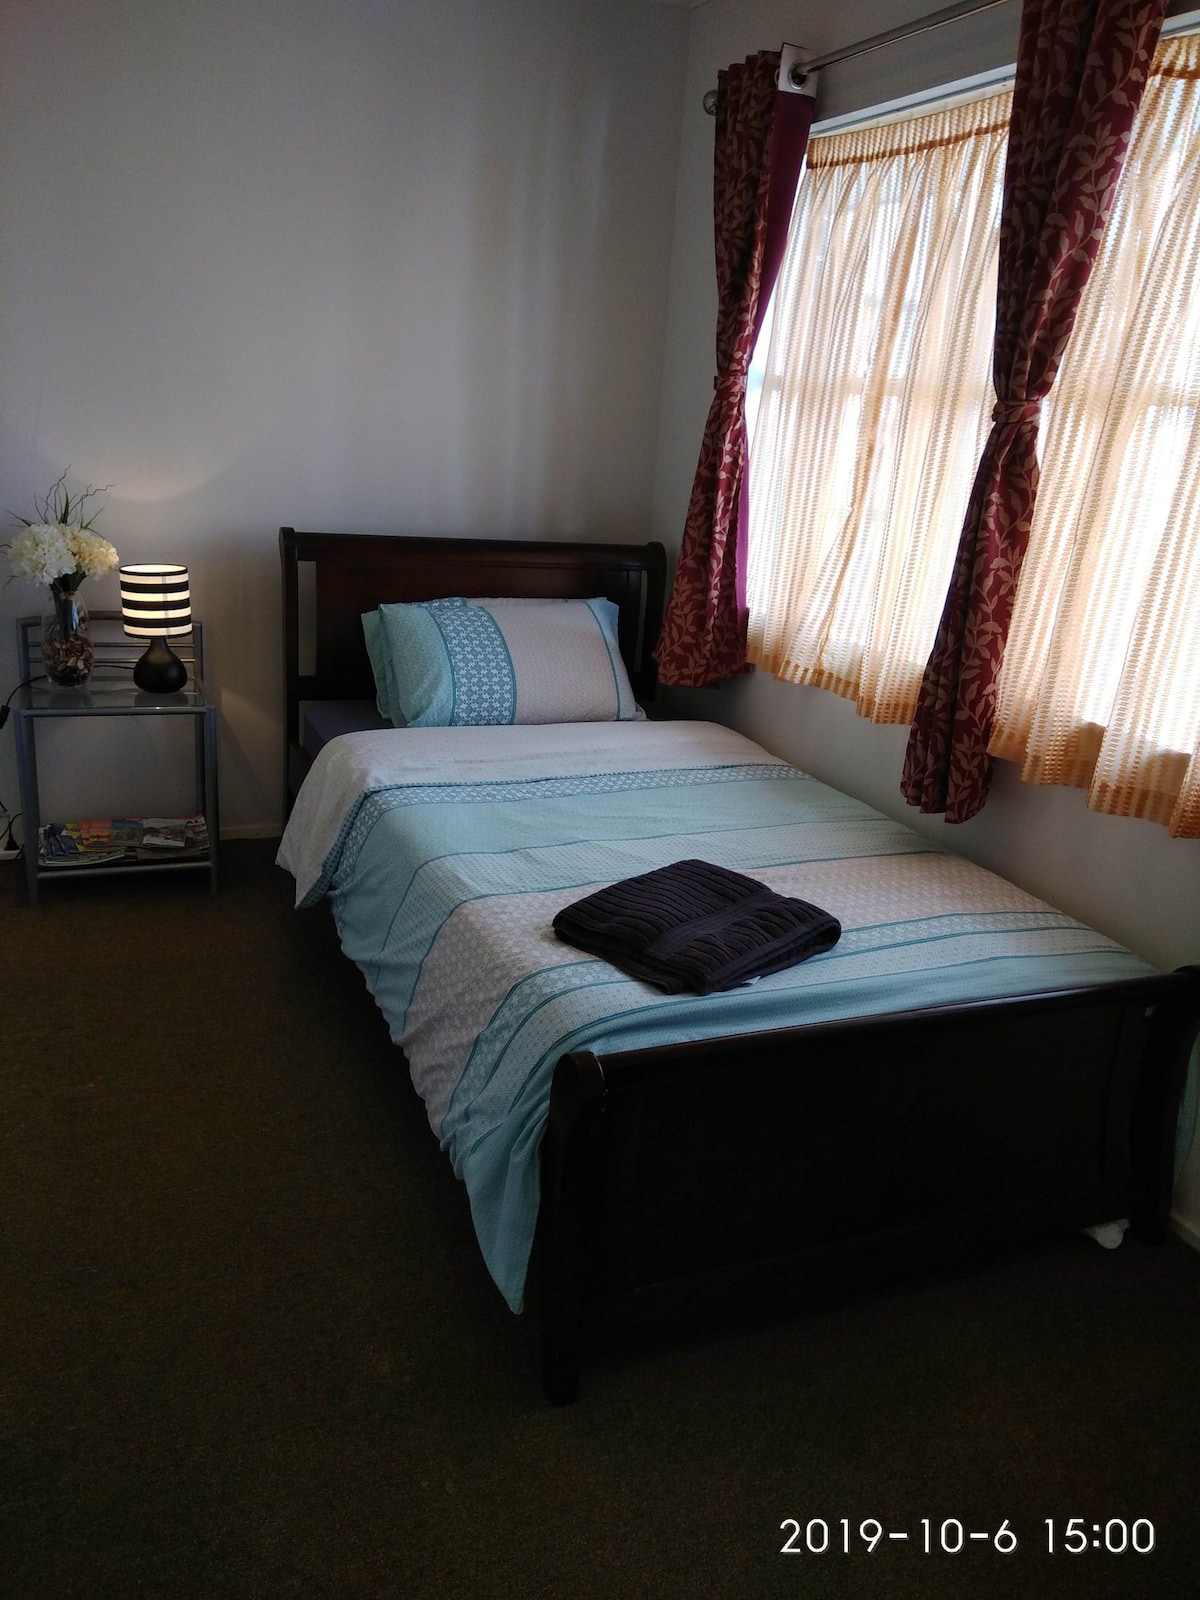 Budget friendly single room near the airport.